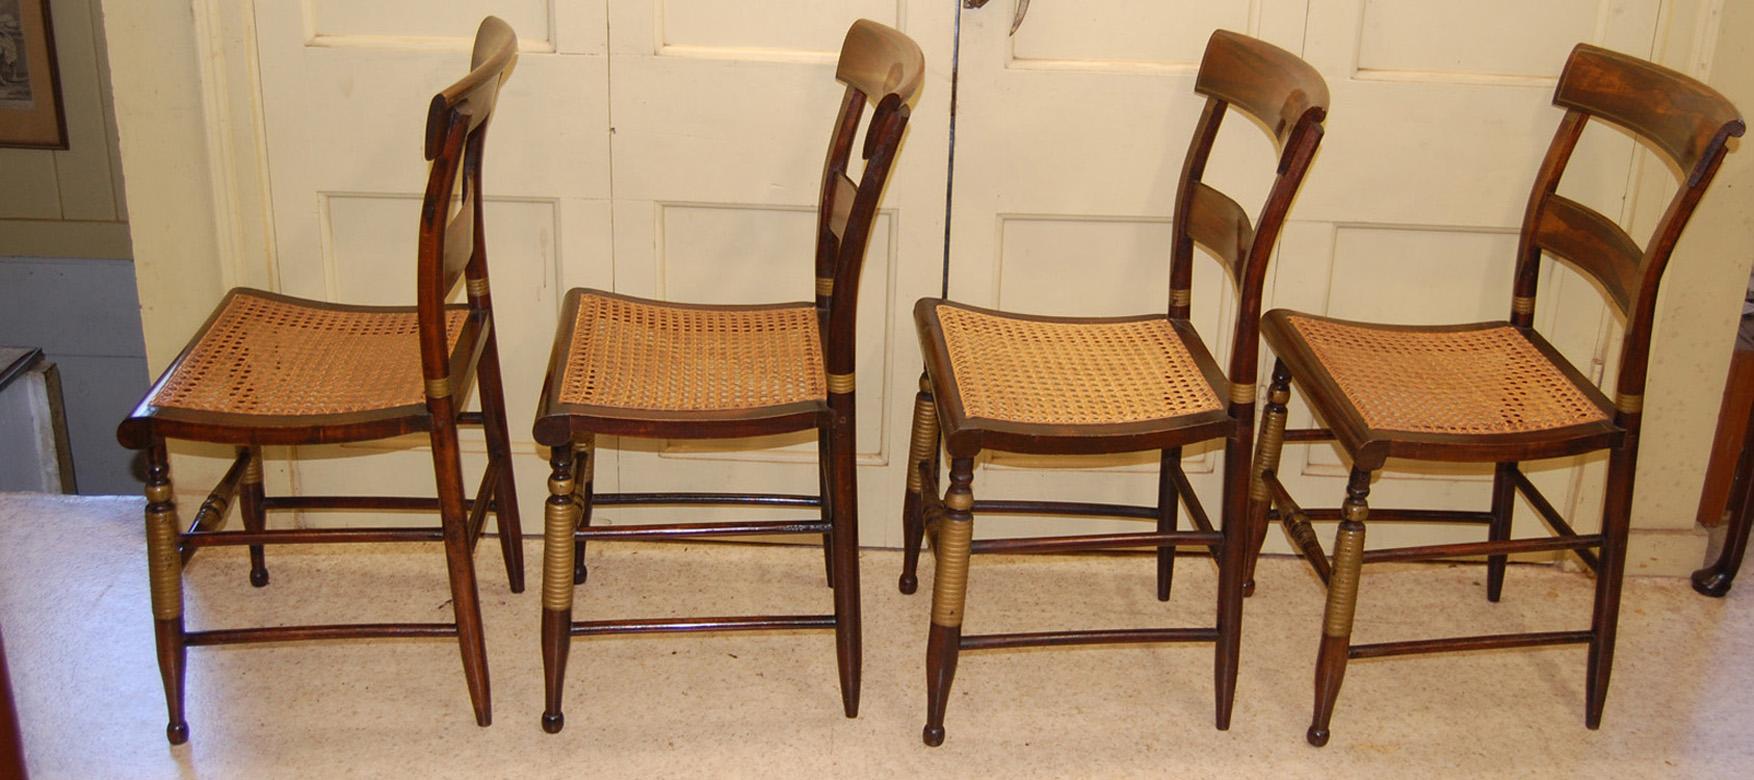 Country American Set of Four Mid 19th Century Grain Painted Hitchcock Chairs Caned Seats